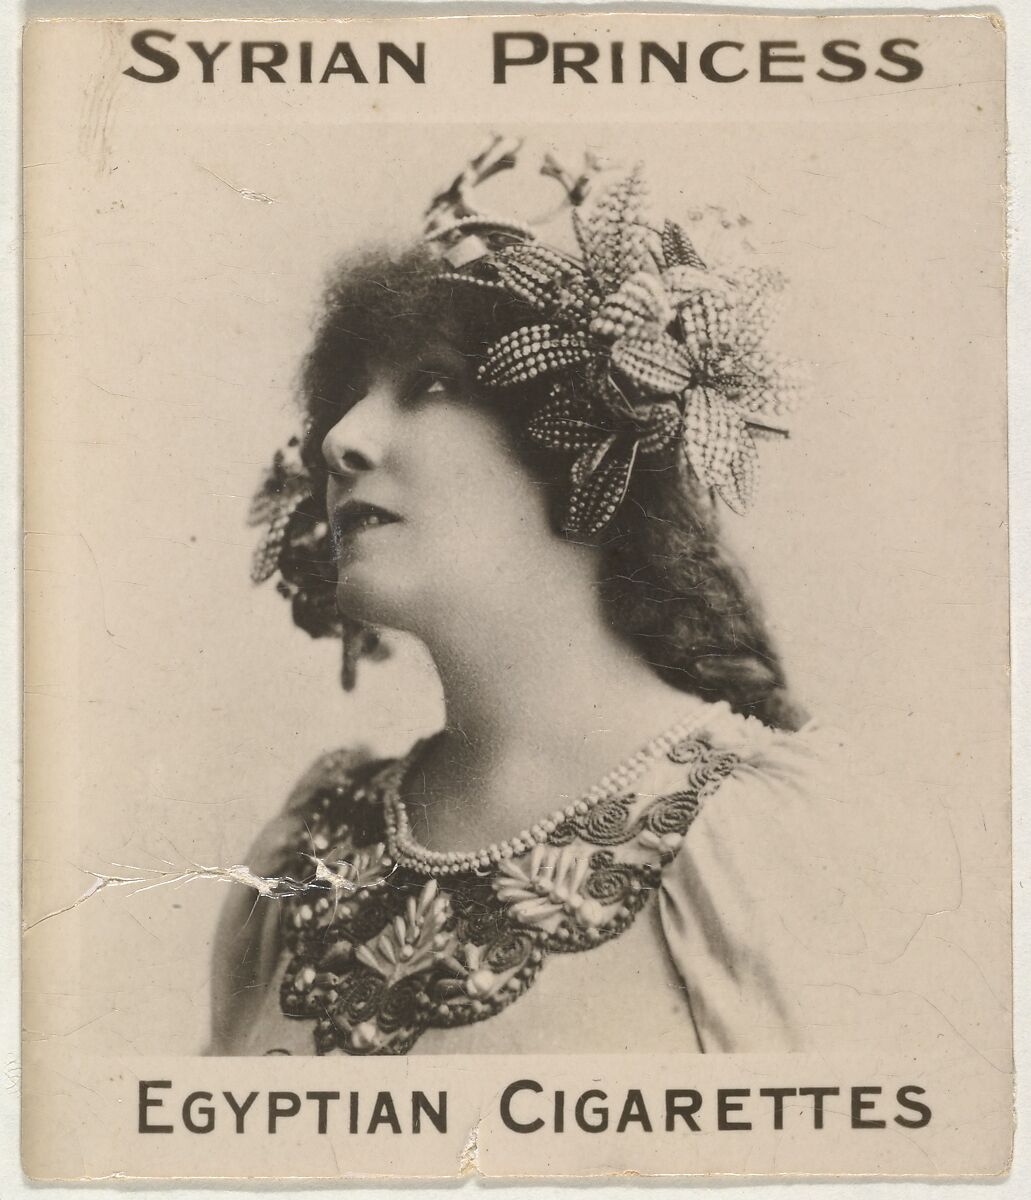 Anonymous actress, from the Actresses series (T123, Type 2), issued by Neil McCoull Co. to promote Syrian Princess Egyptian Cigarettes, Issued by Neil McCoull Co.  , New York, Albumen print 